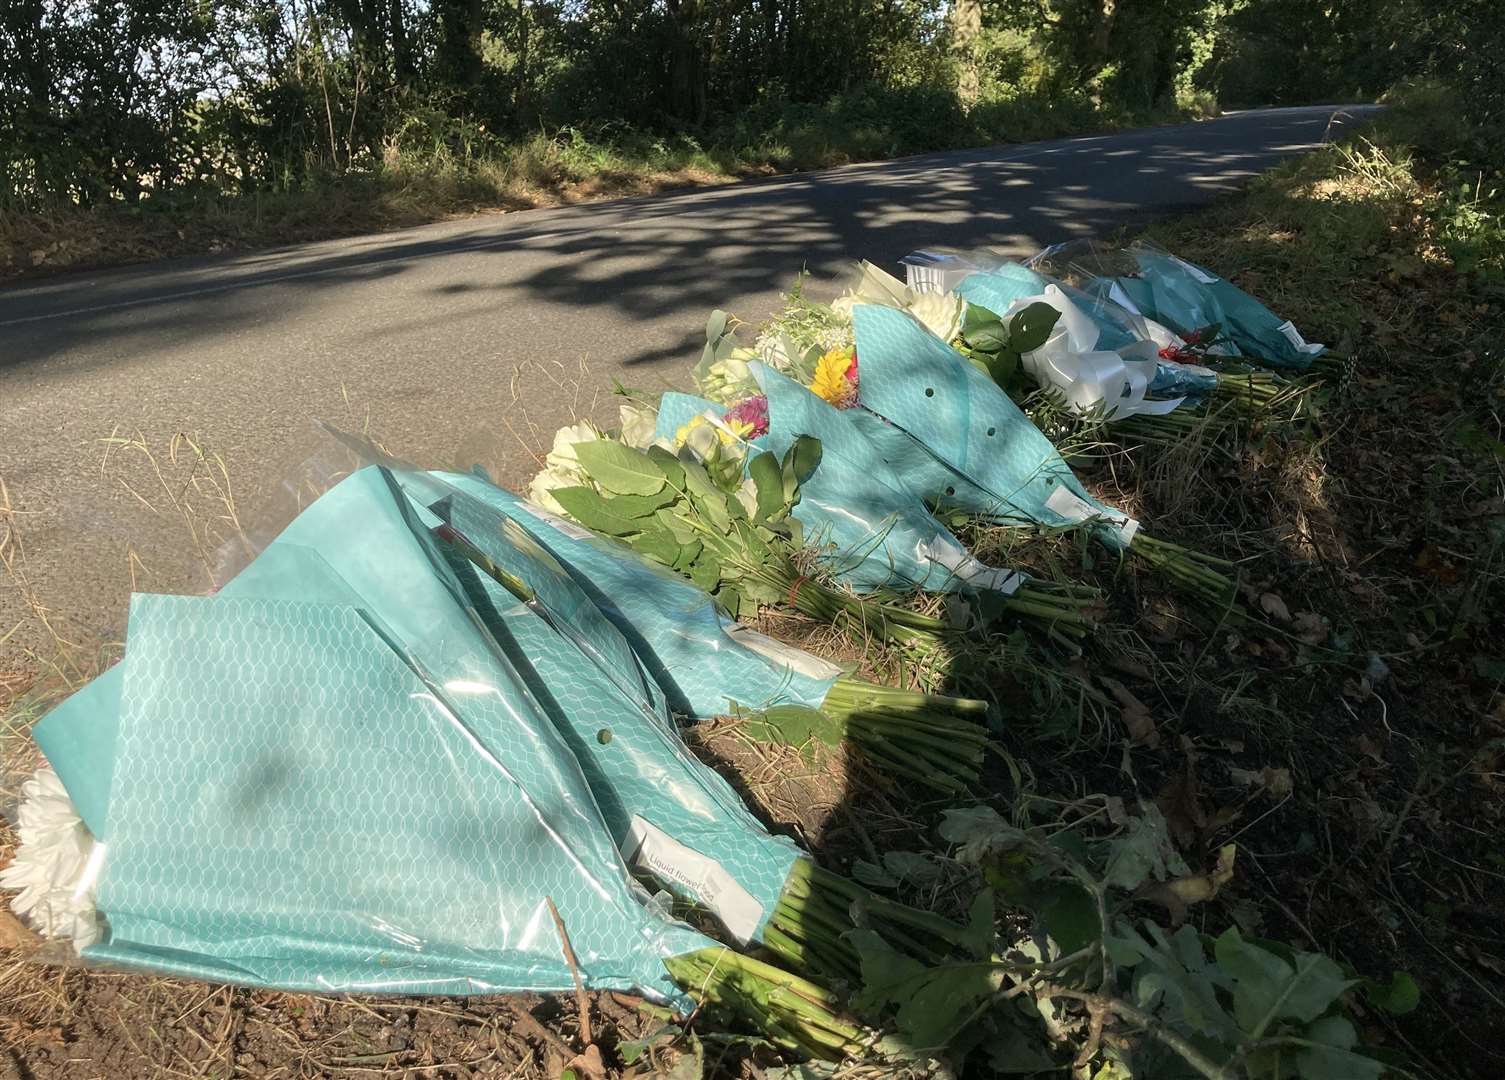 Floral tributes left along Lenham Road, Headcorn in memory of four members men who passed away after a crash. Jerry Cash, 15, is the sole survivor